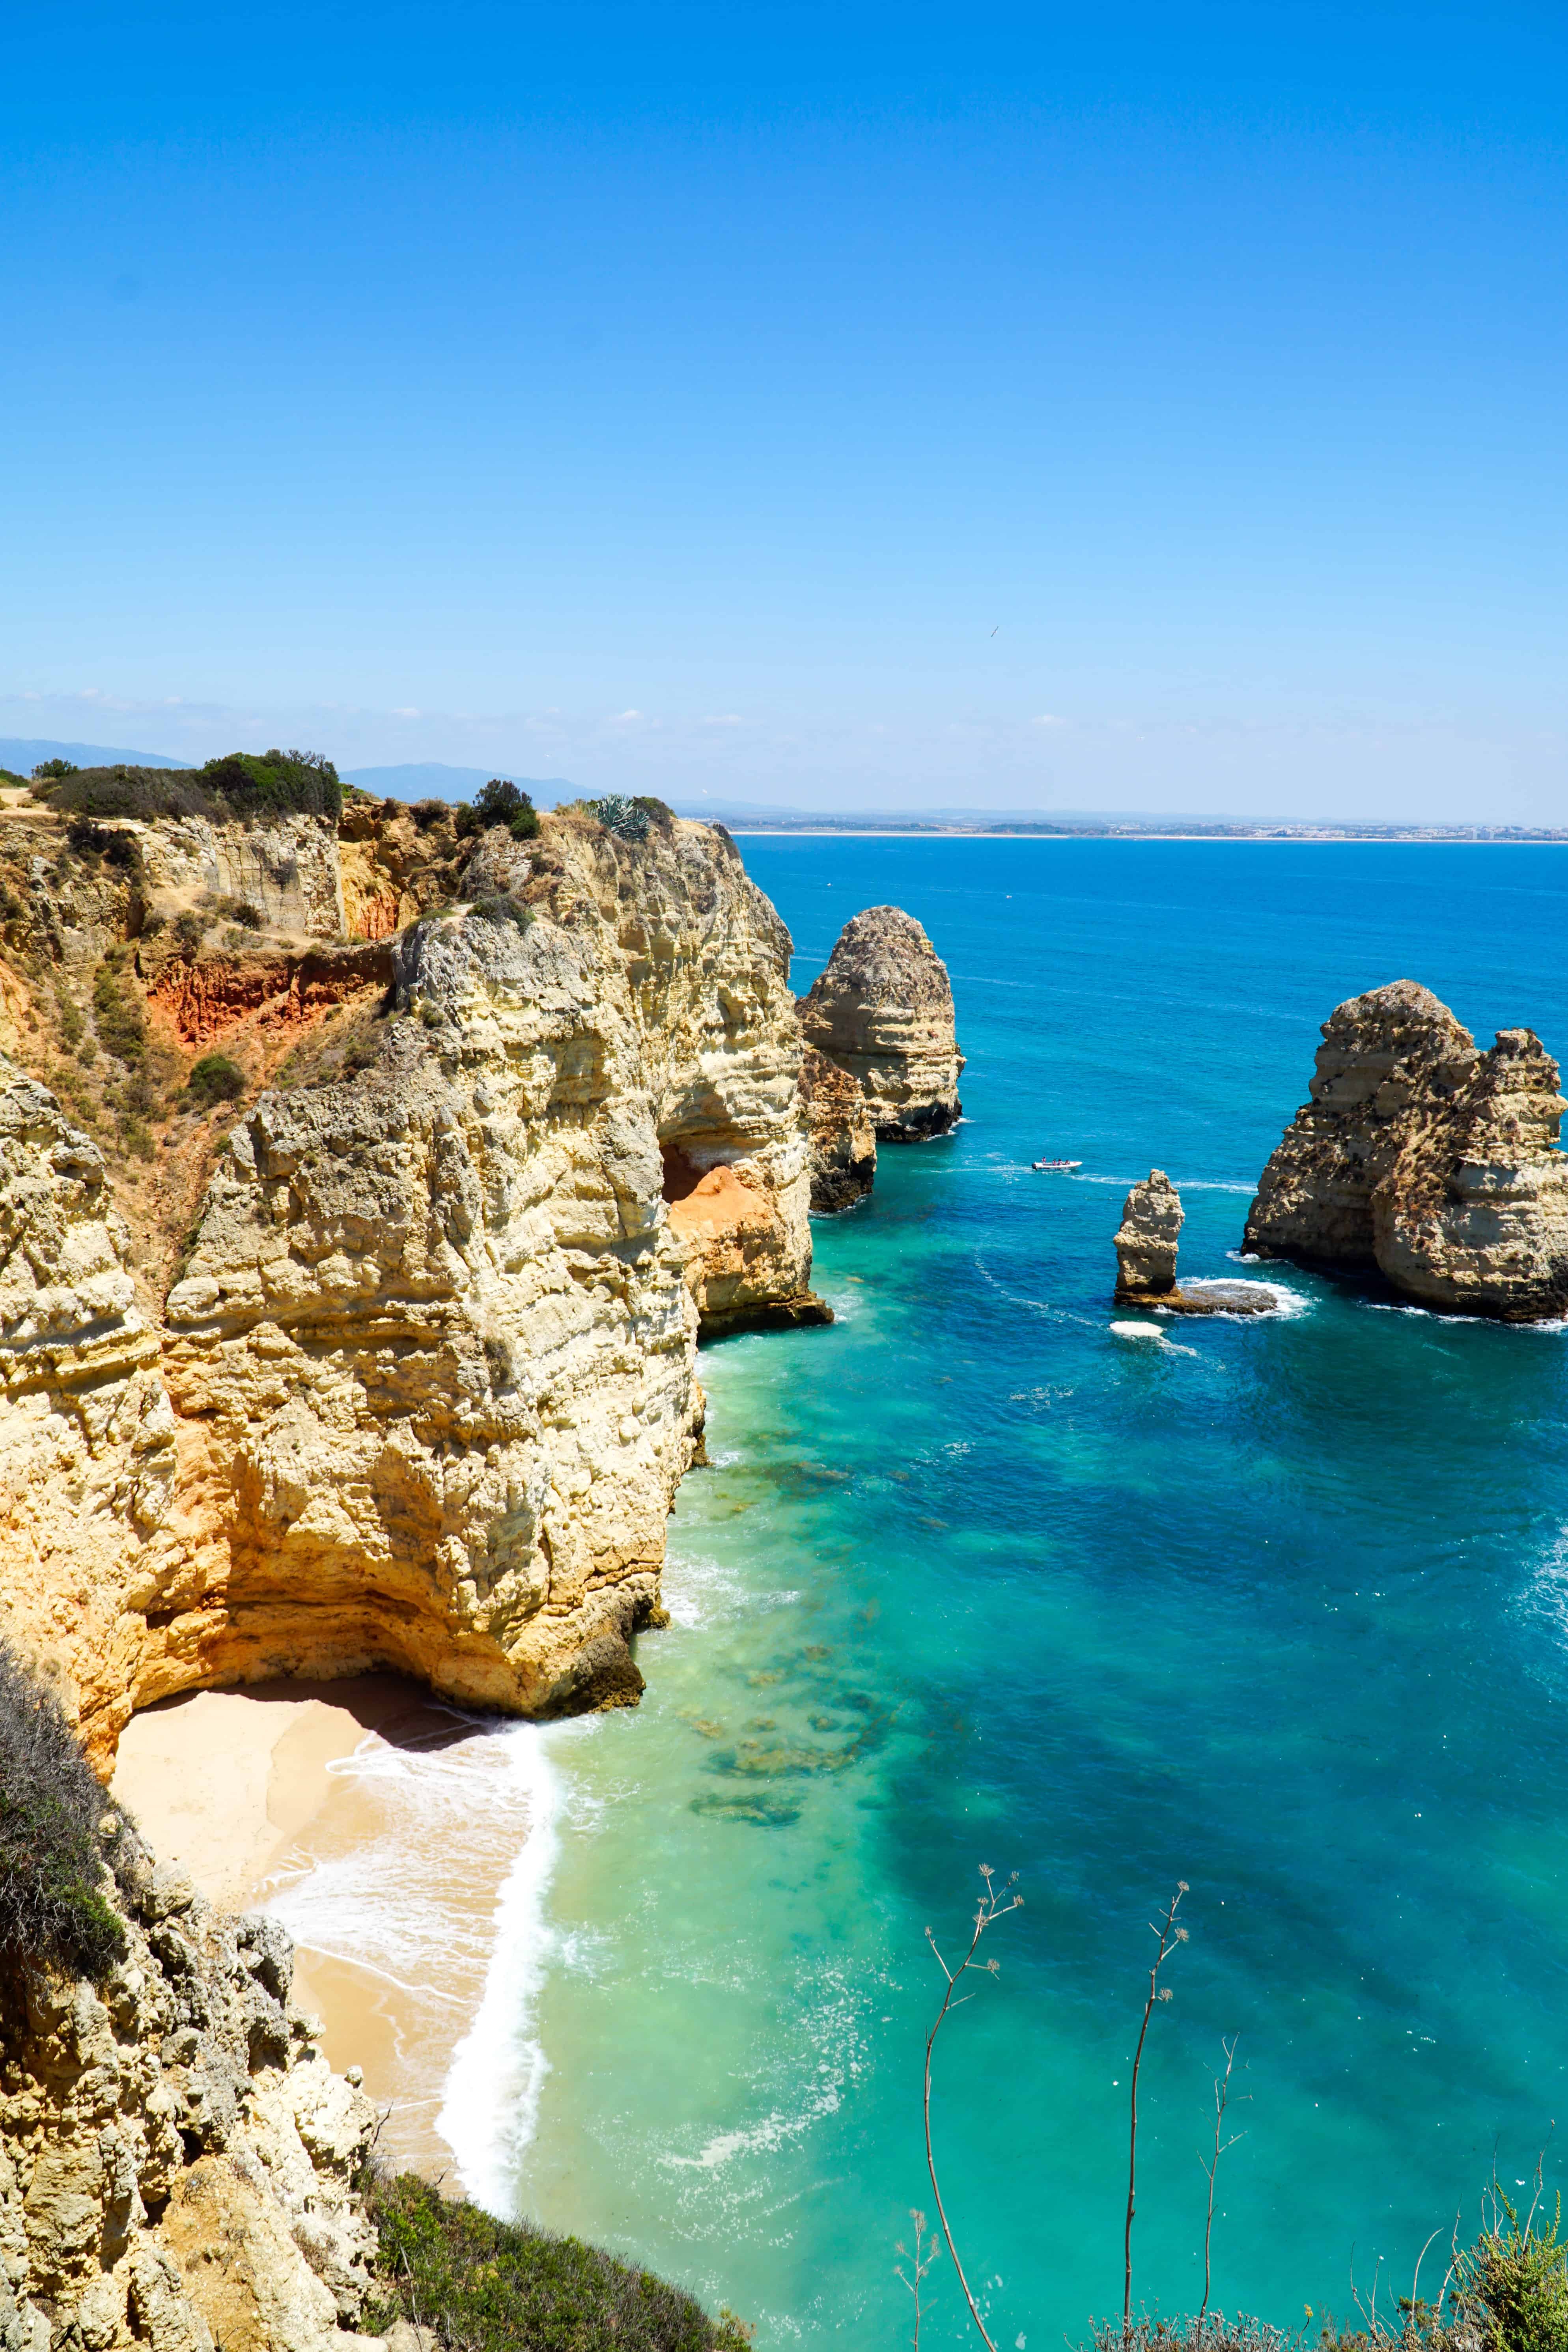 The Most Romantic Destinations in Europe | Algarve, Portugal | The Republic of Rose | #Romance #ValentinesDay #RomanticDestination #CouplesGetaway #Europe #Travel